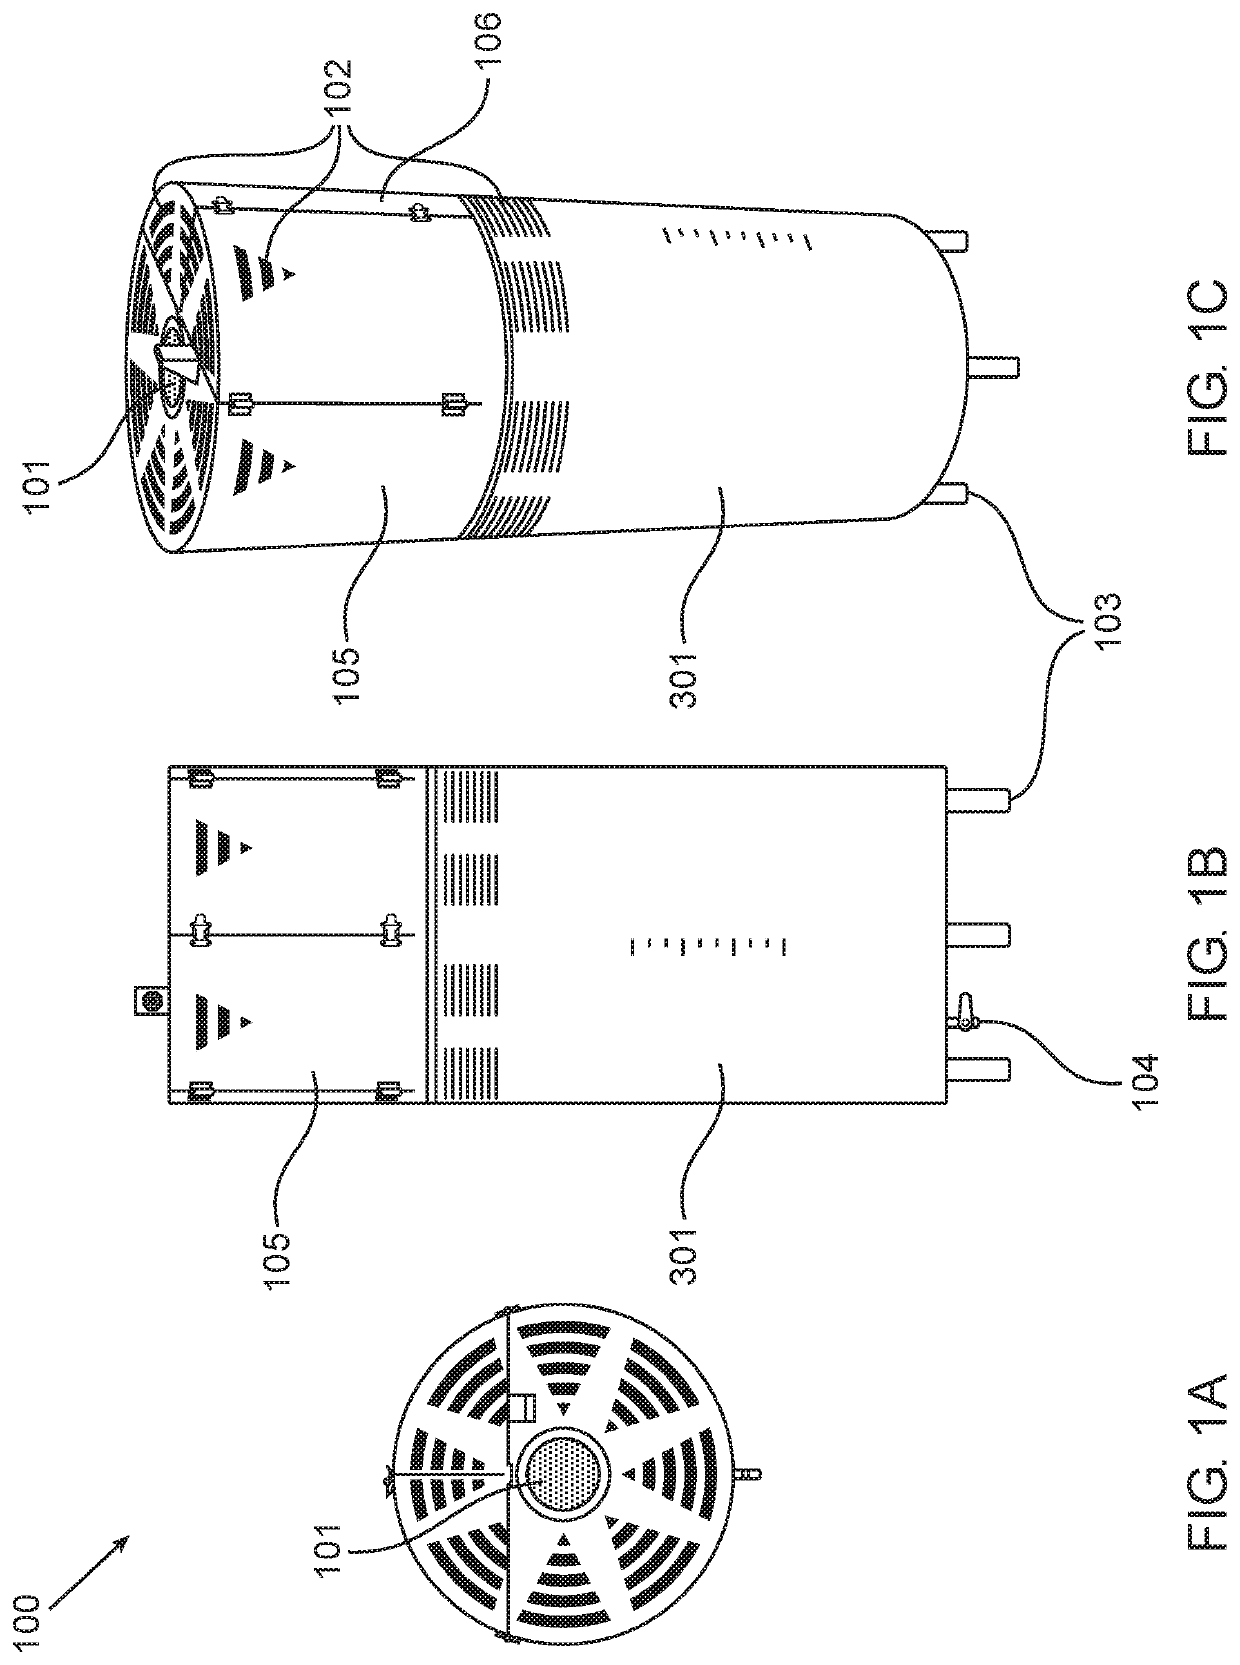 Biological systems and methods for air purification